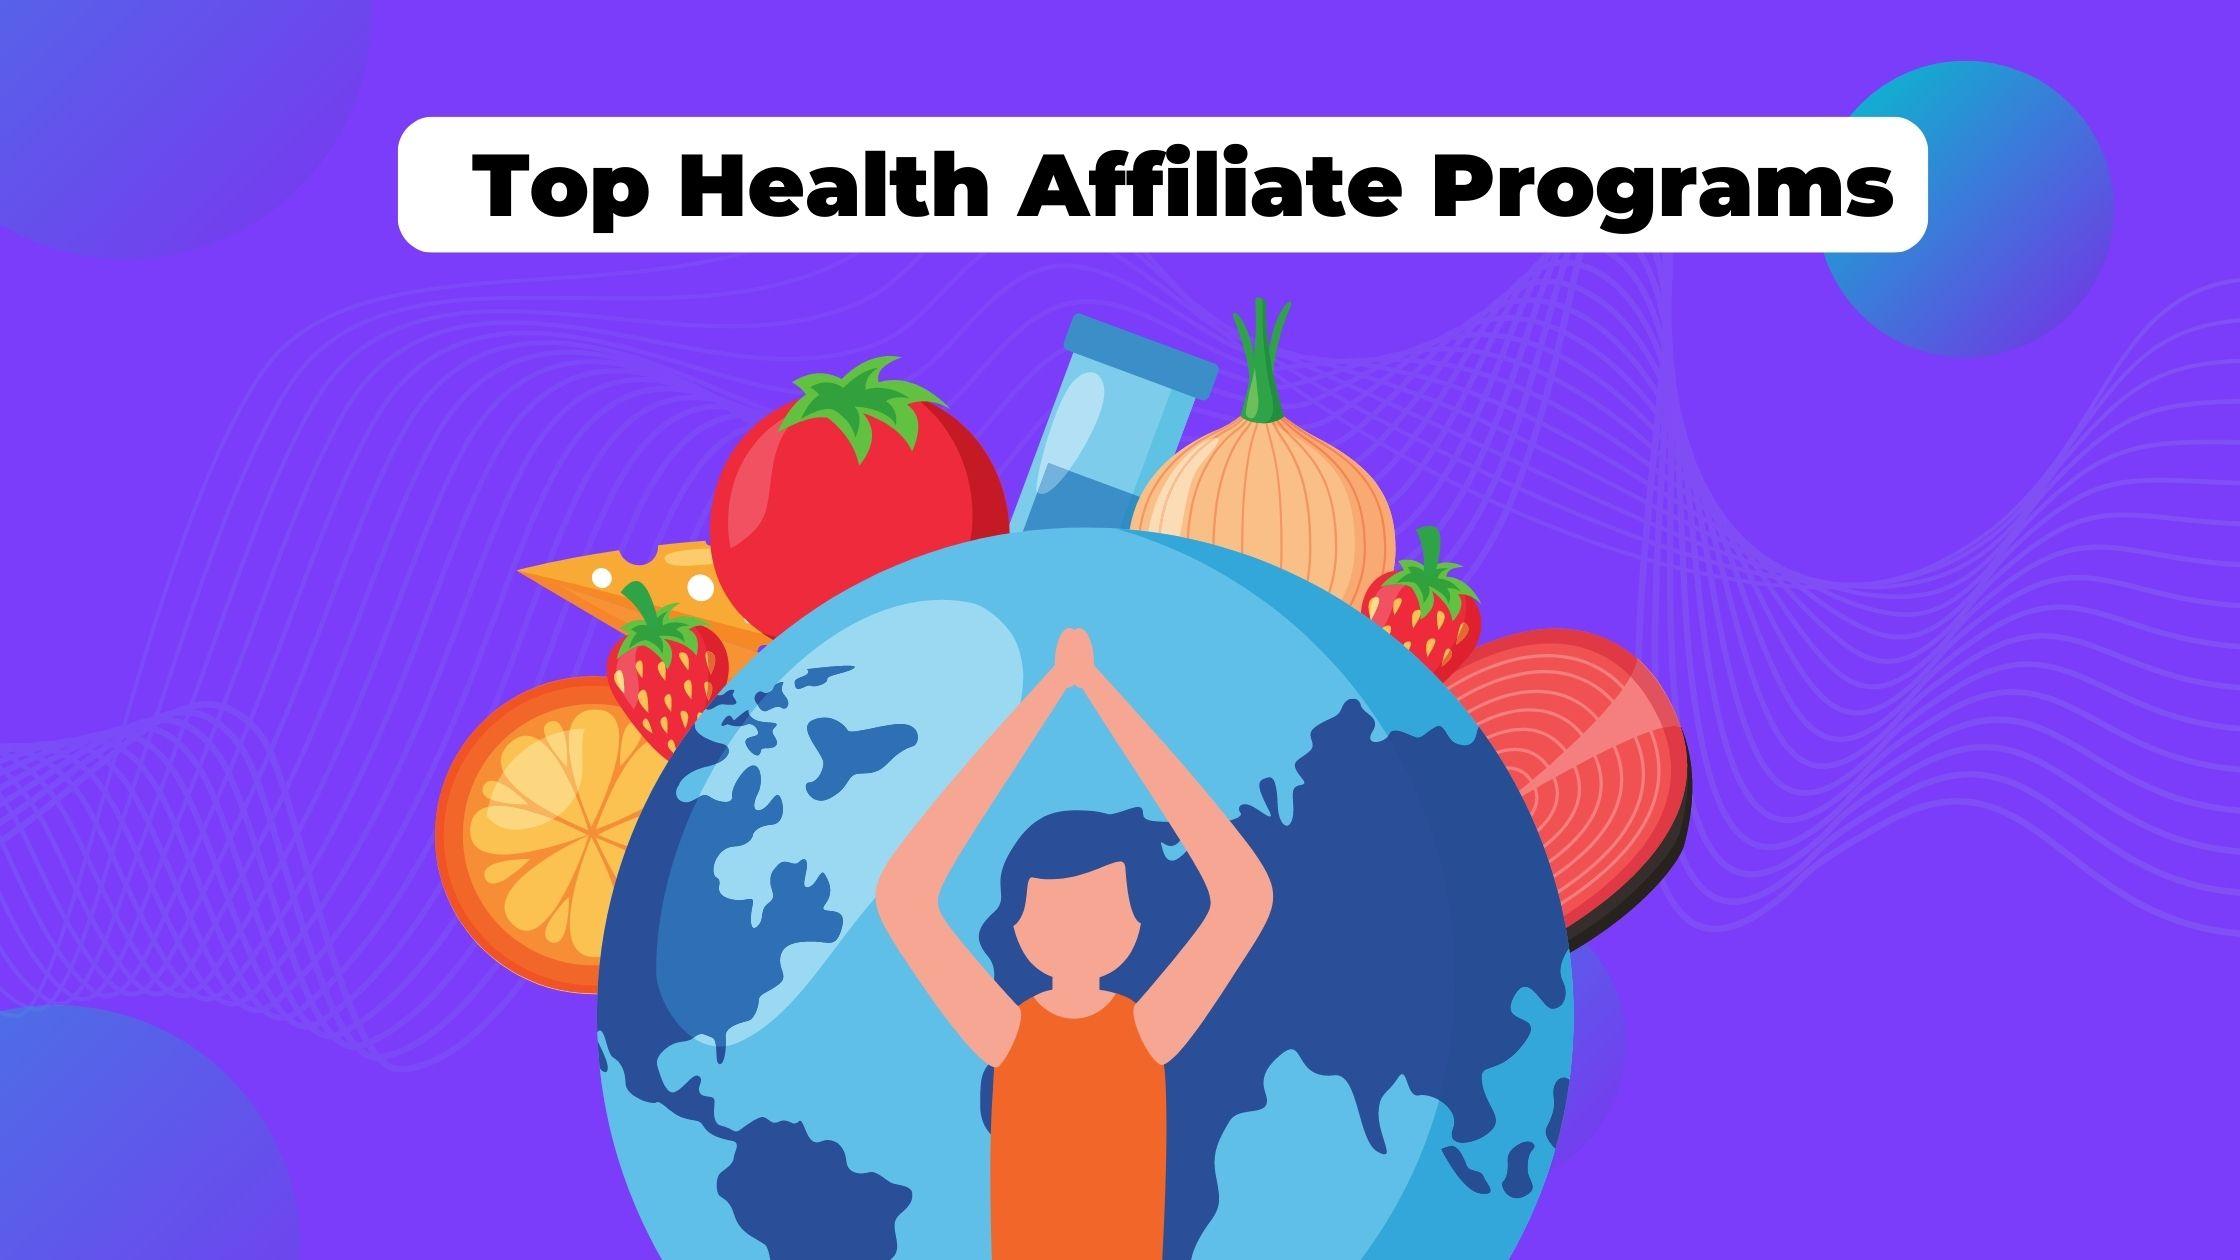 Top Health Affiliate Programs The Ultimate Guide for Health and Wellness